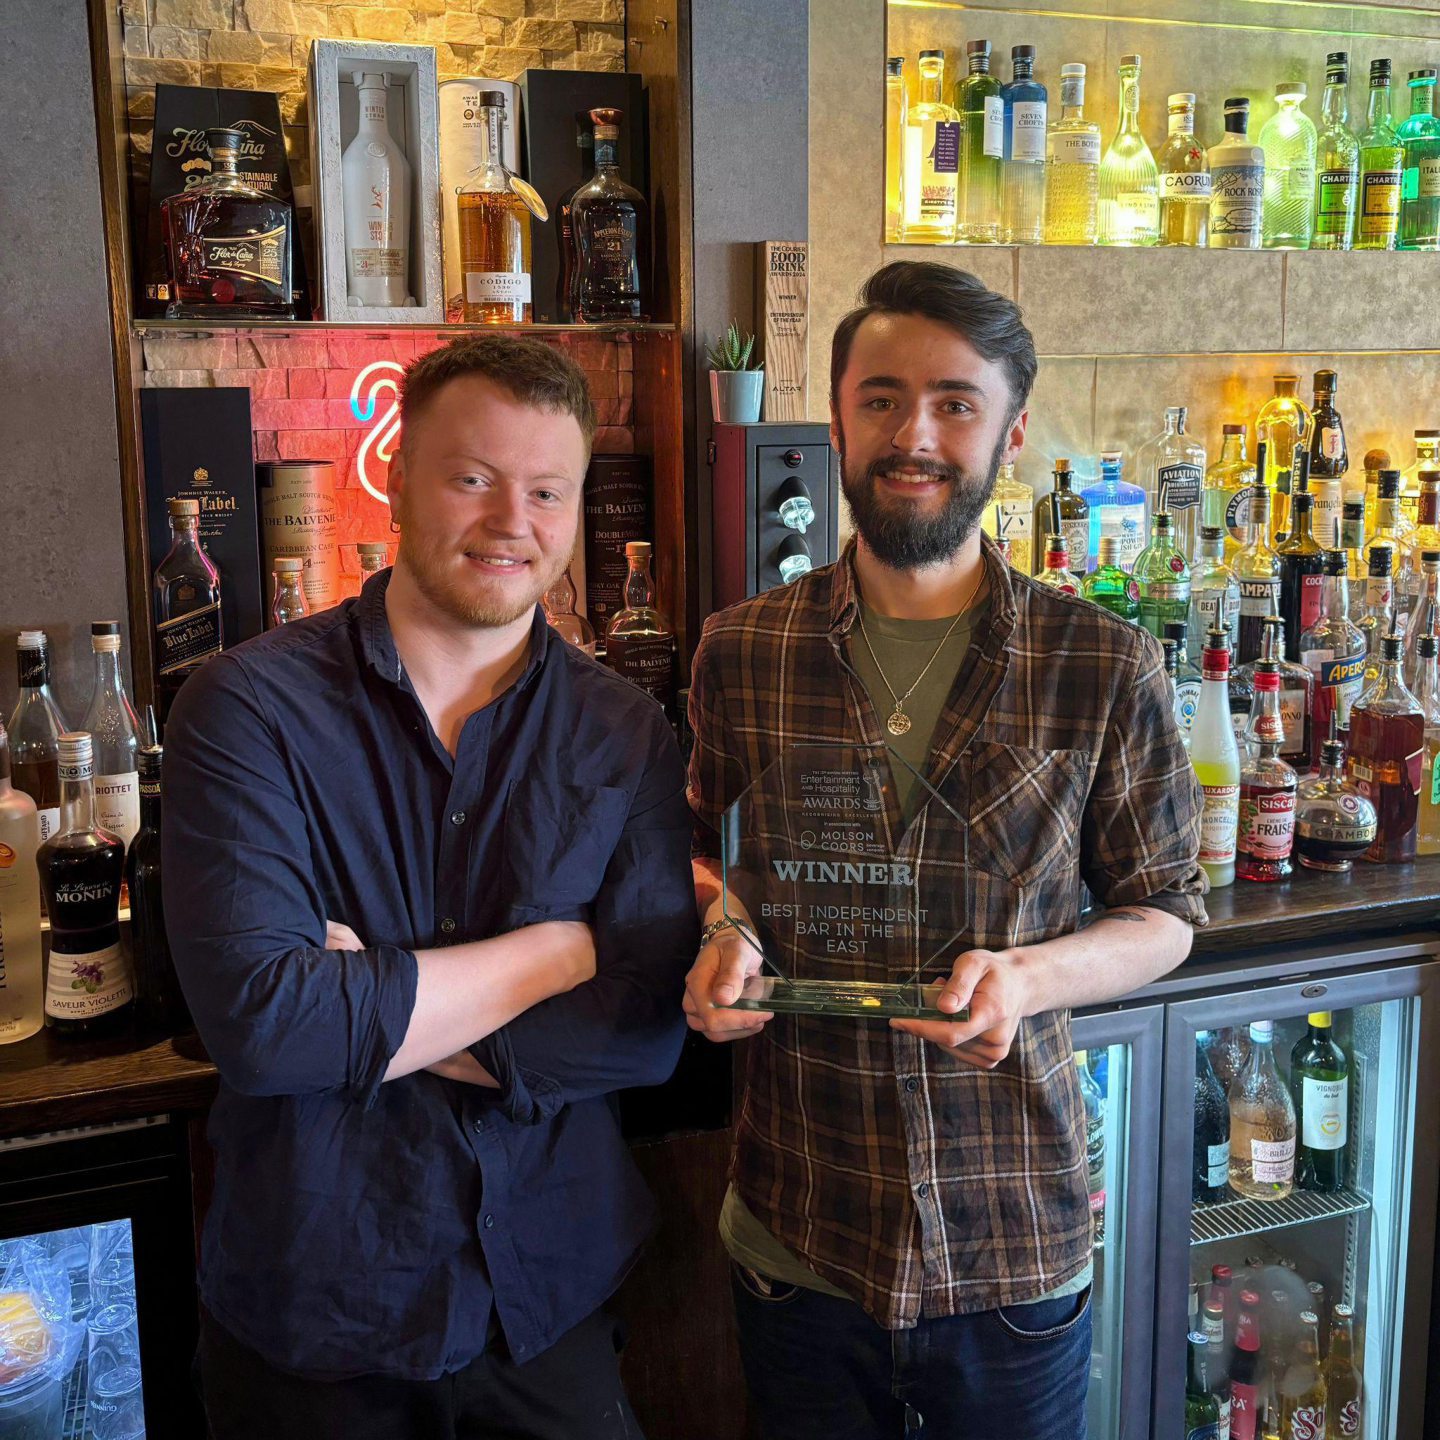 Jake Taylor and John Wallace celebrate their Scottish Entertainment Award at the Bruach bar.